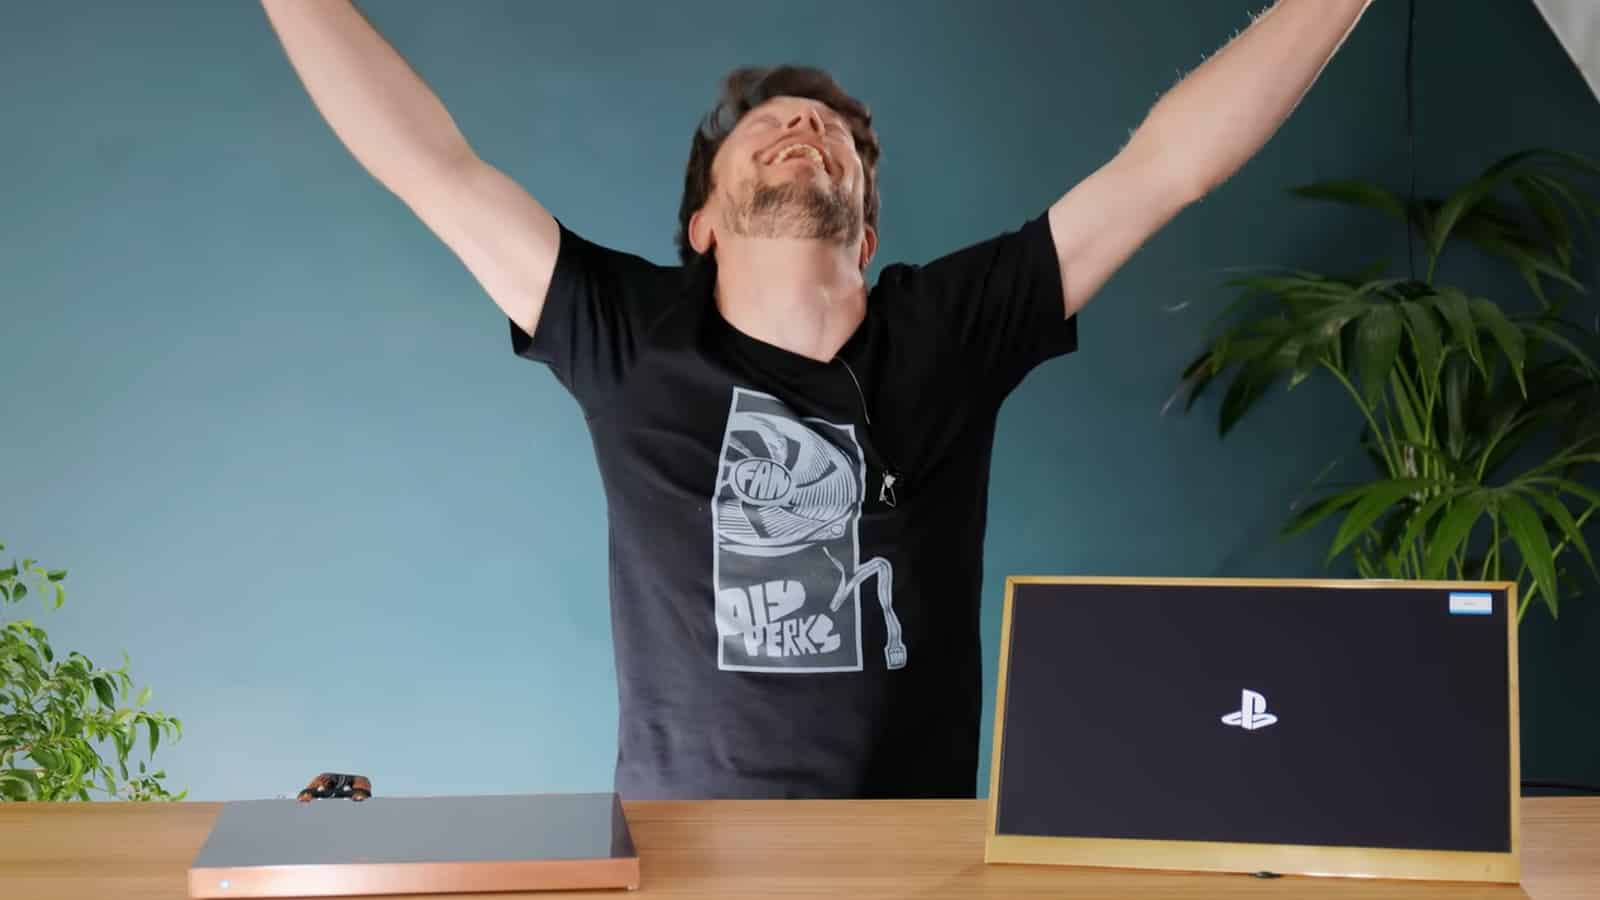 YouTuber DIY Perks celebrates after building a DIY PS5 Slim console